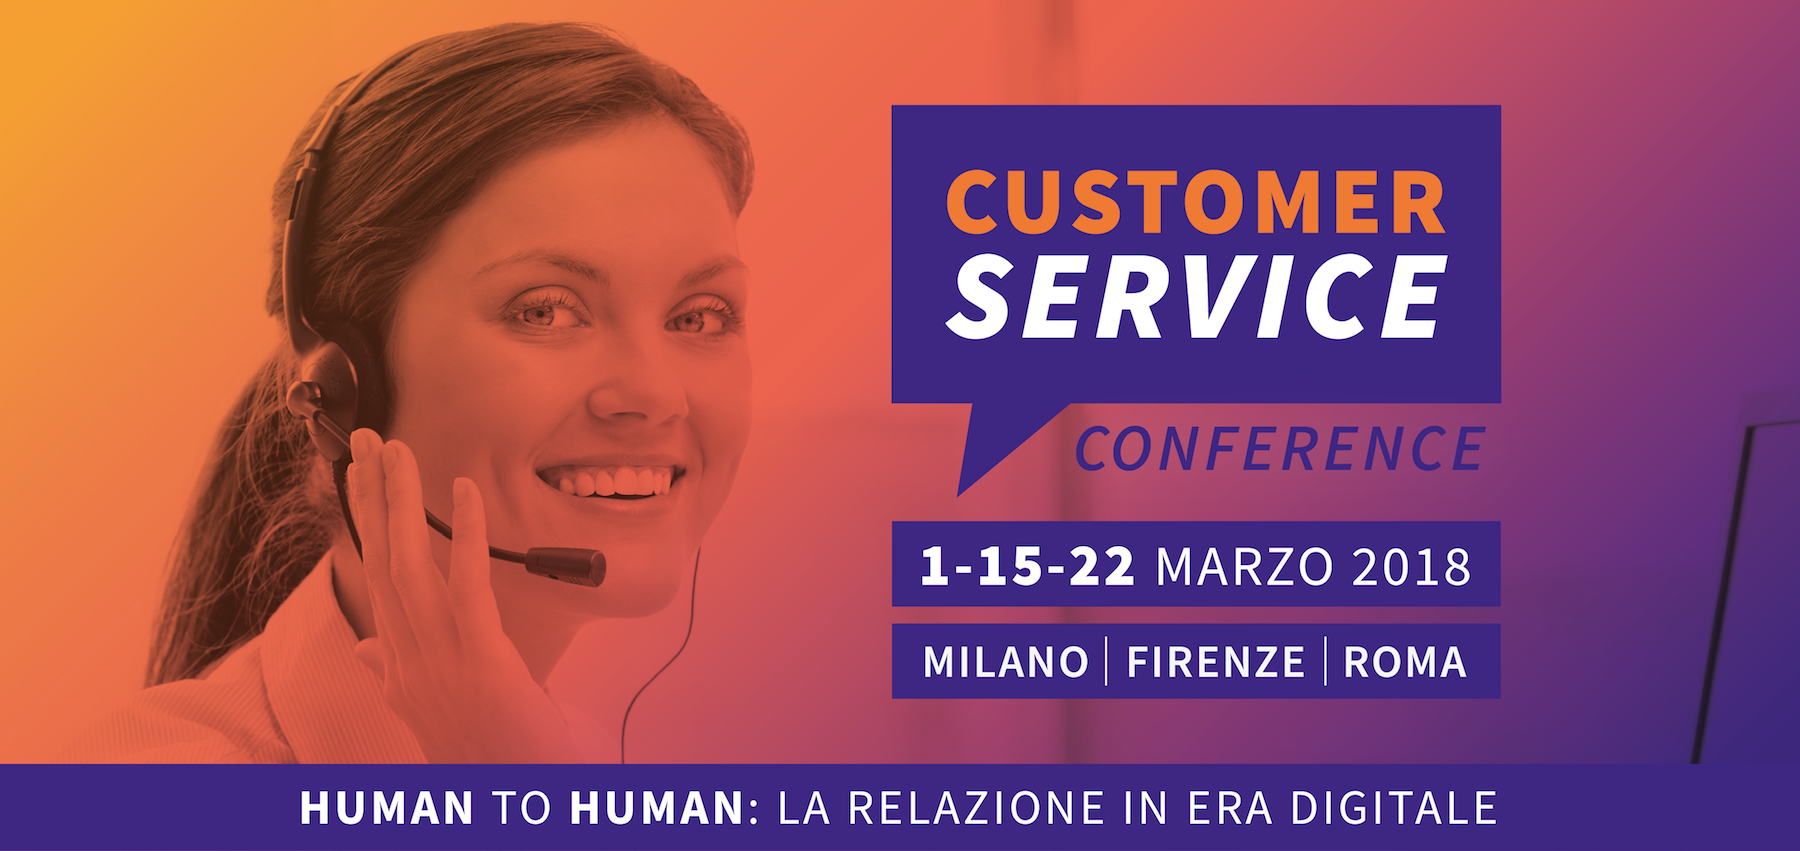 Customer Service Conference